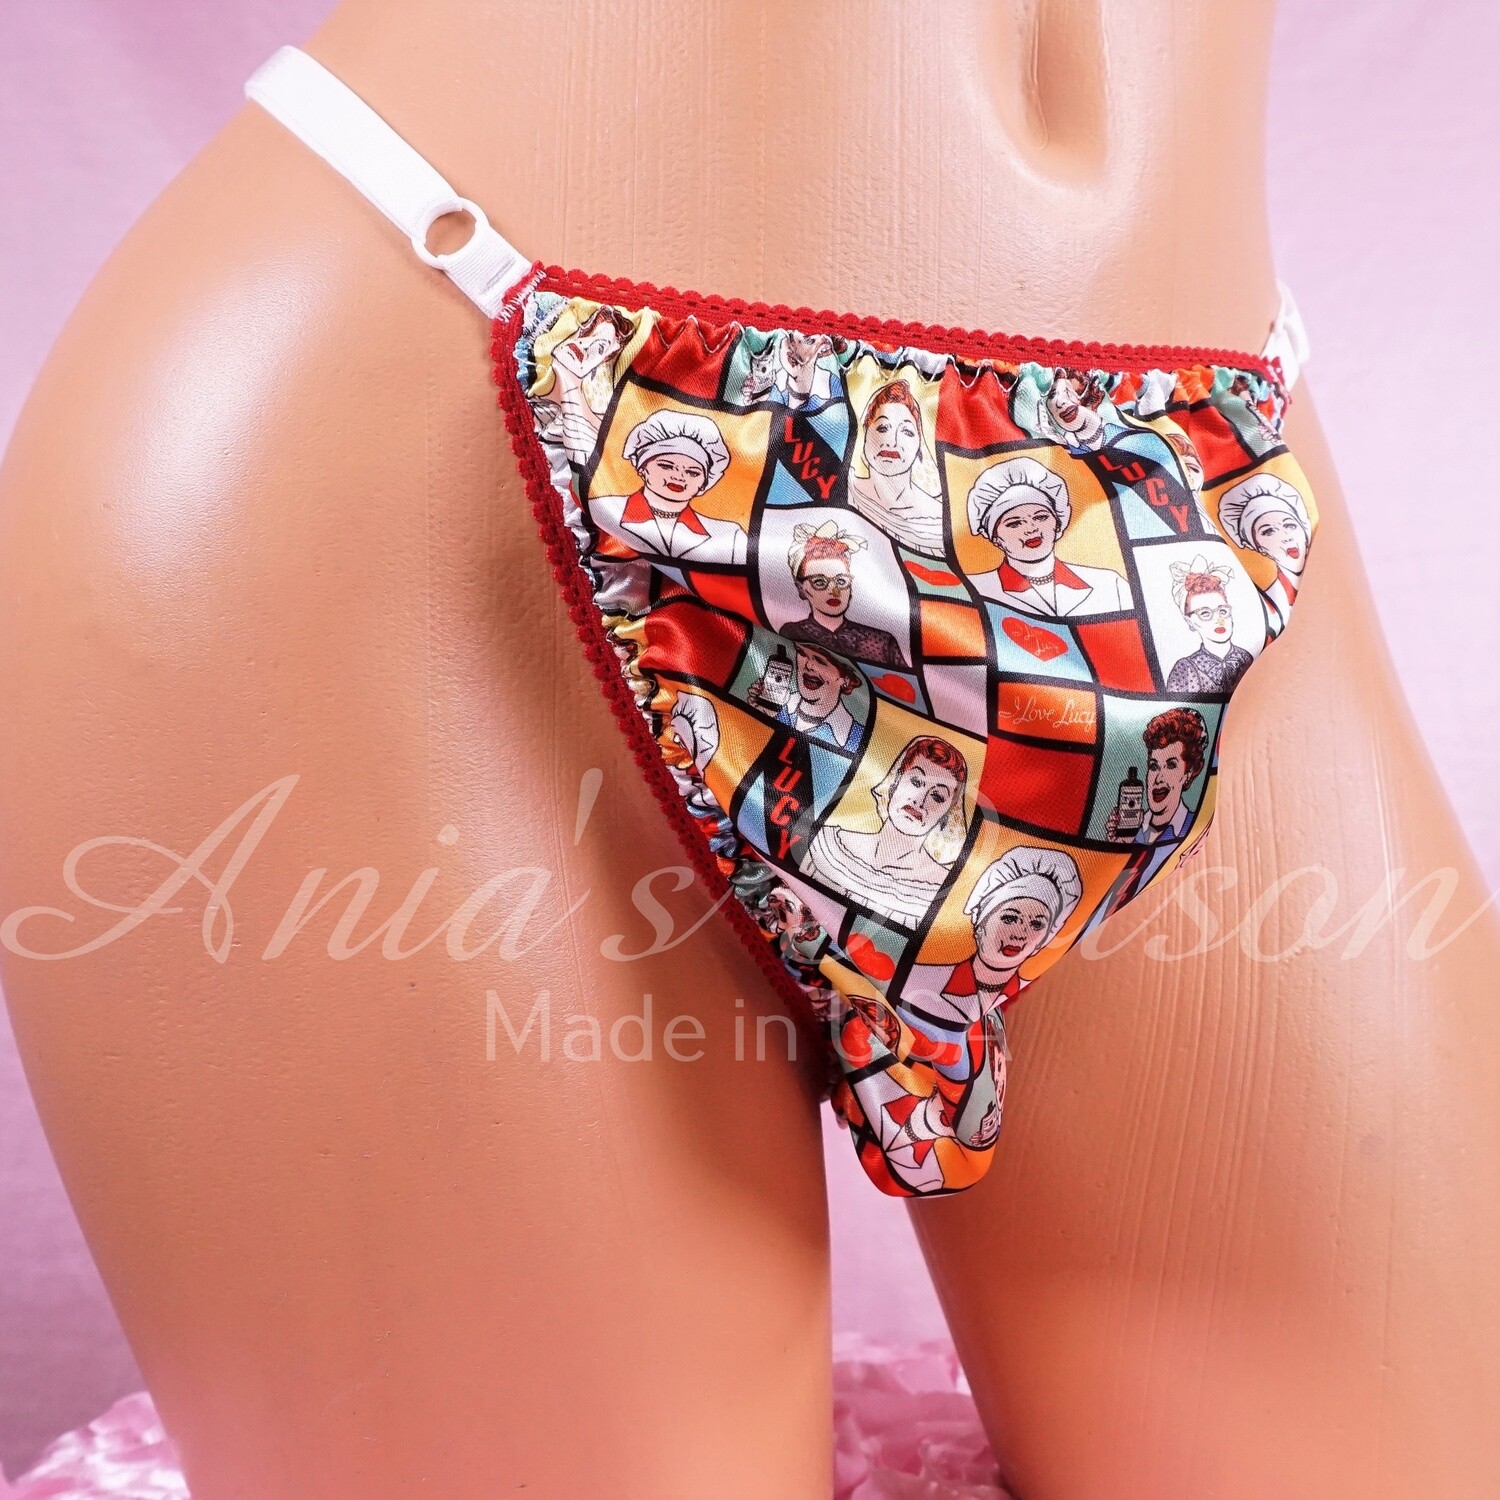 sissy men's soft shiny vintage Lucy Love Red Triangle T thong panties ADJUSTABLE sides underwear panties